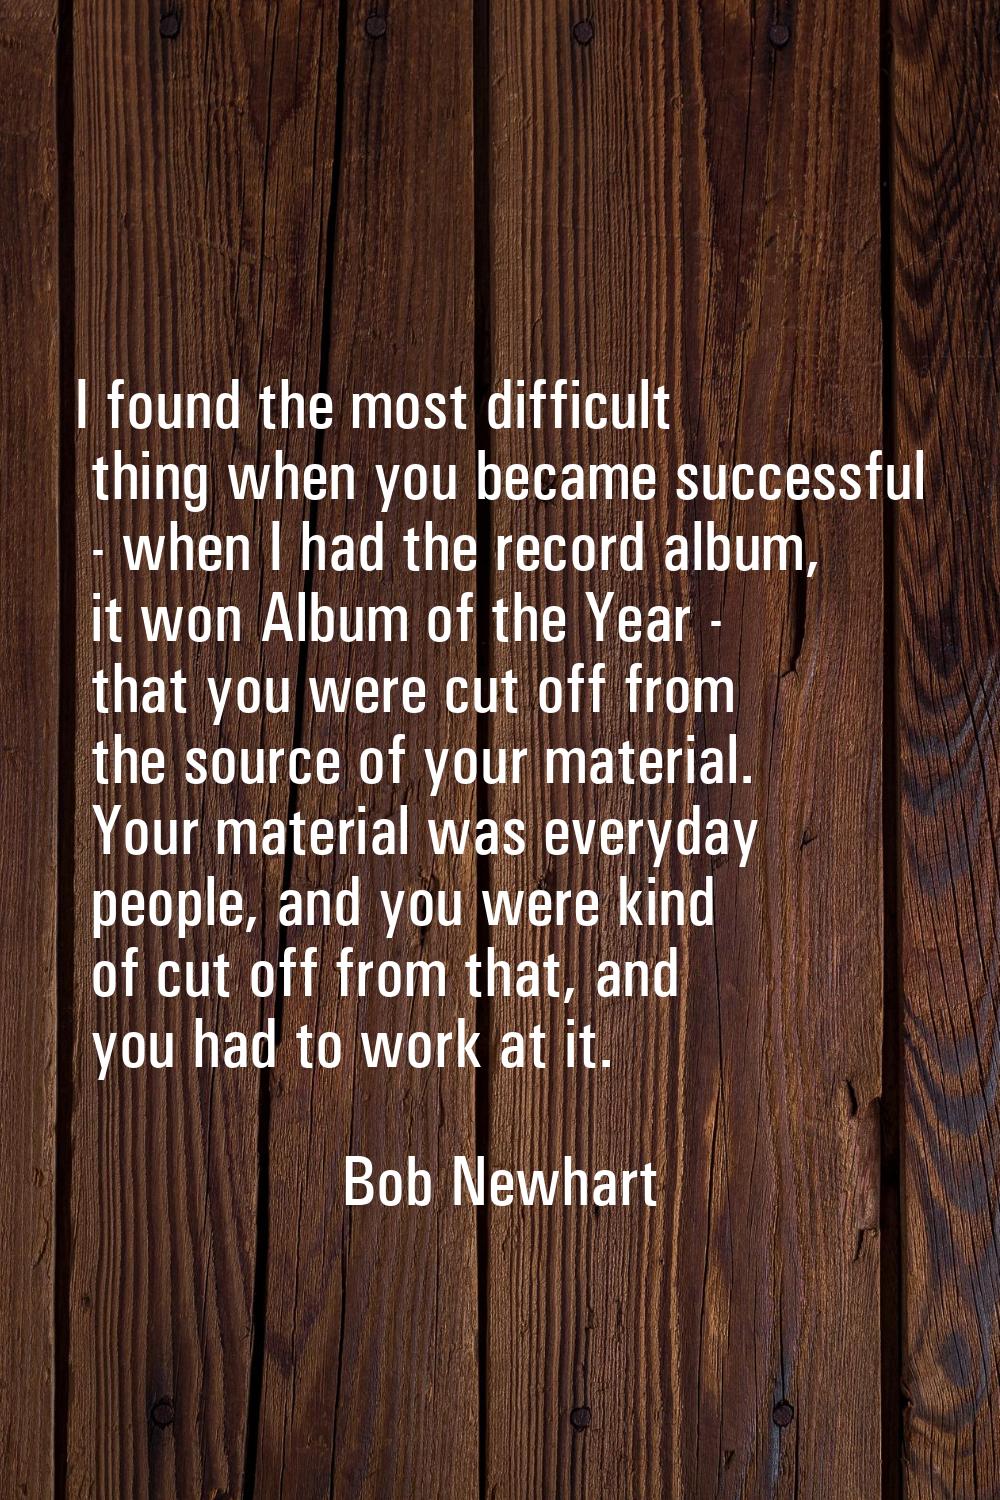 I found the most difficult thing when you became successful - when I had the record album, it won A